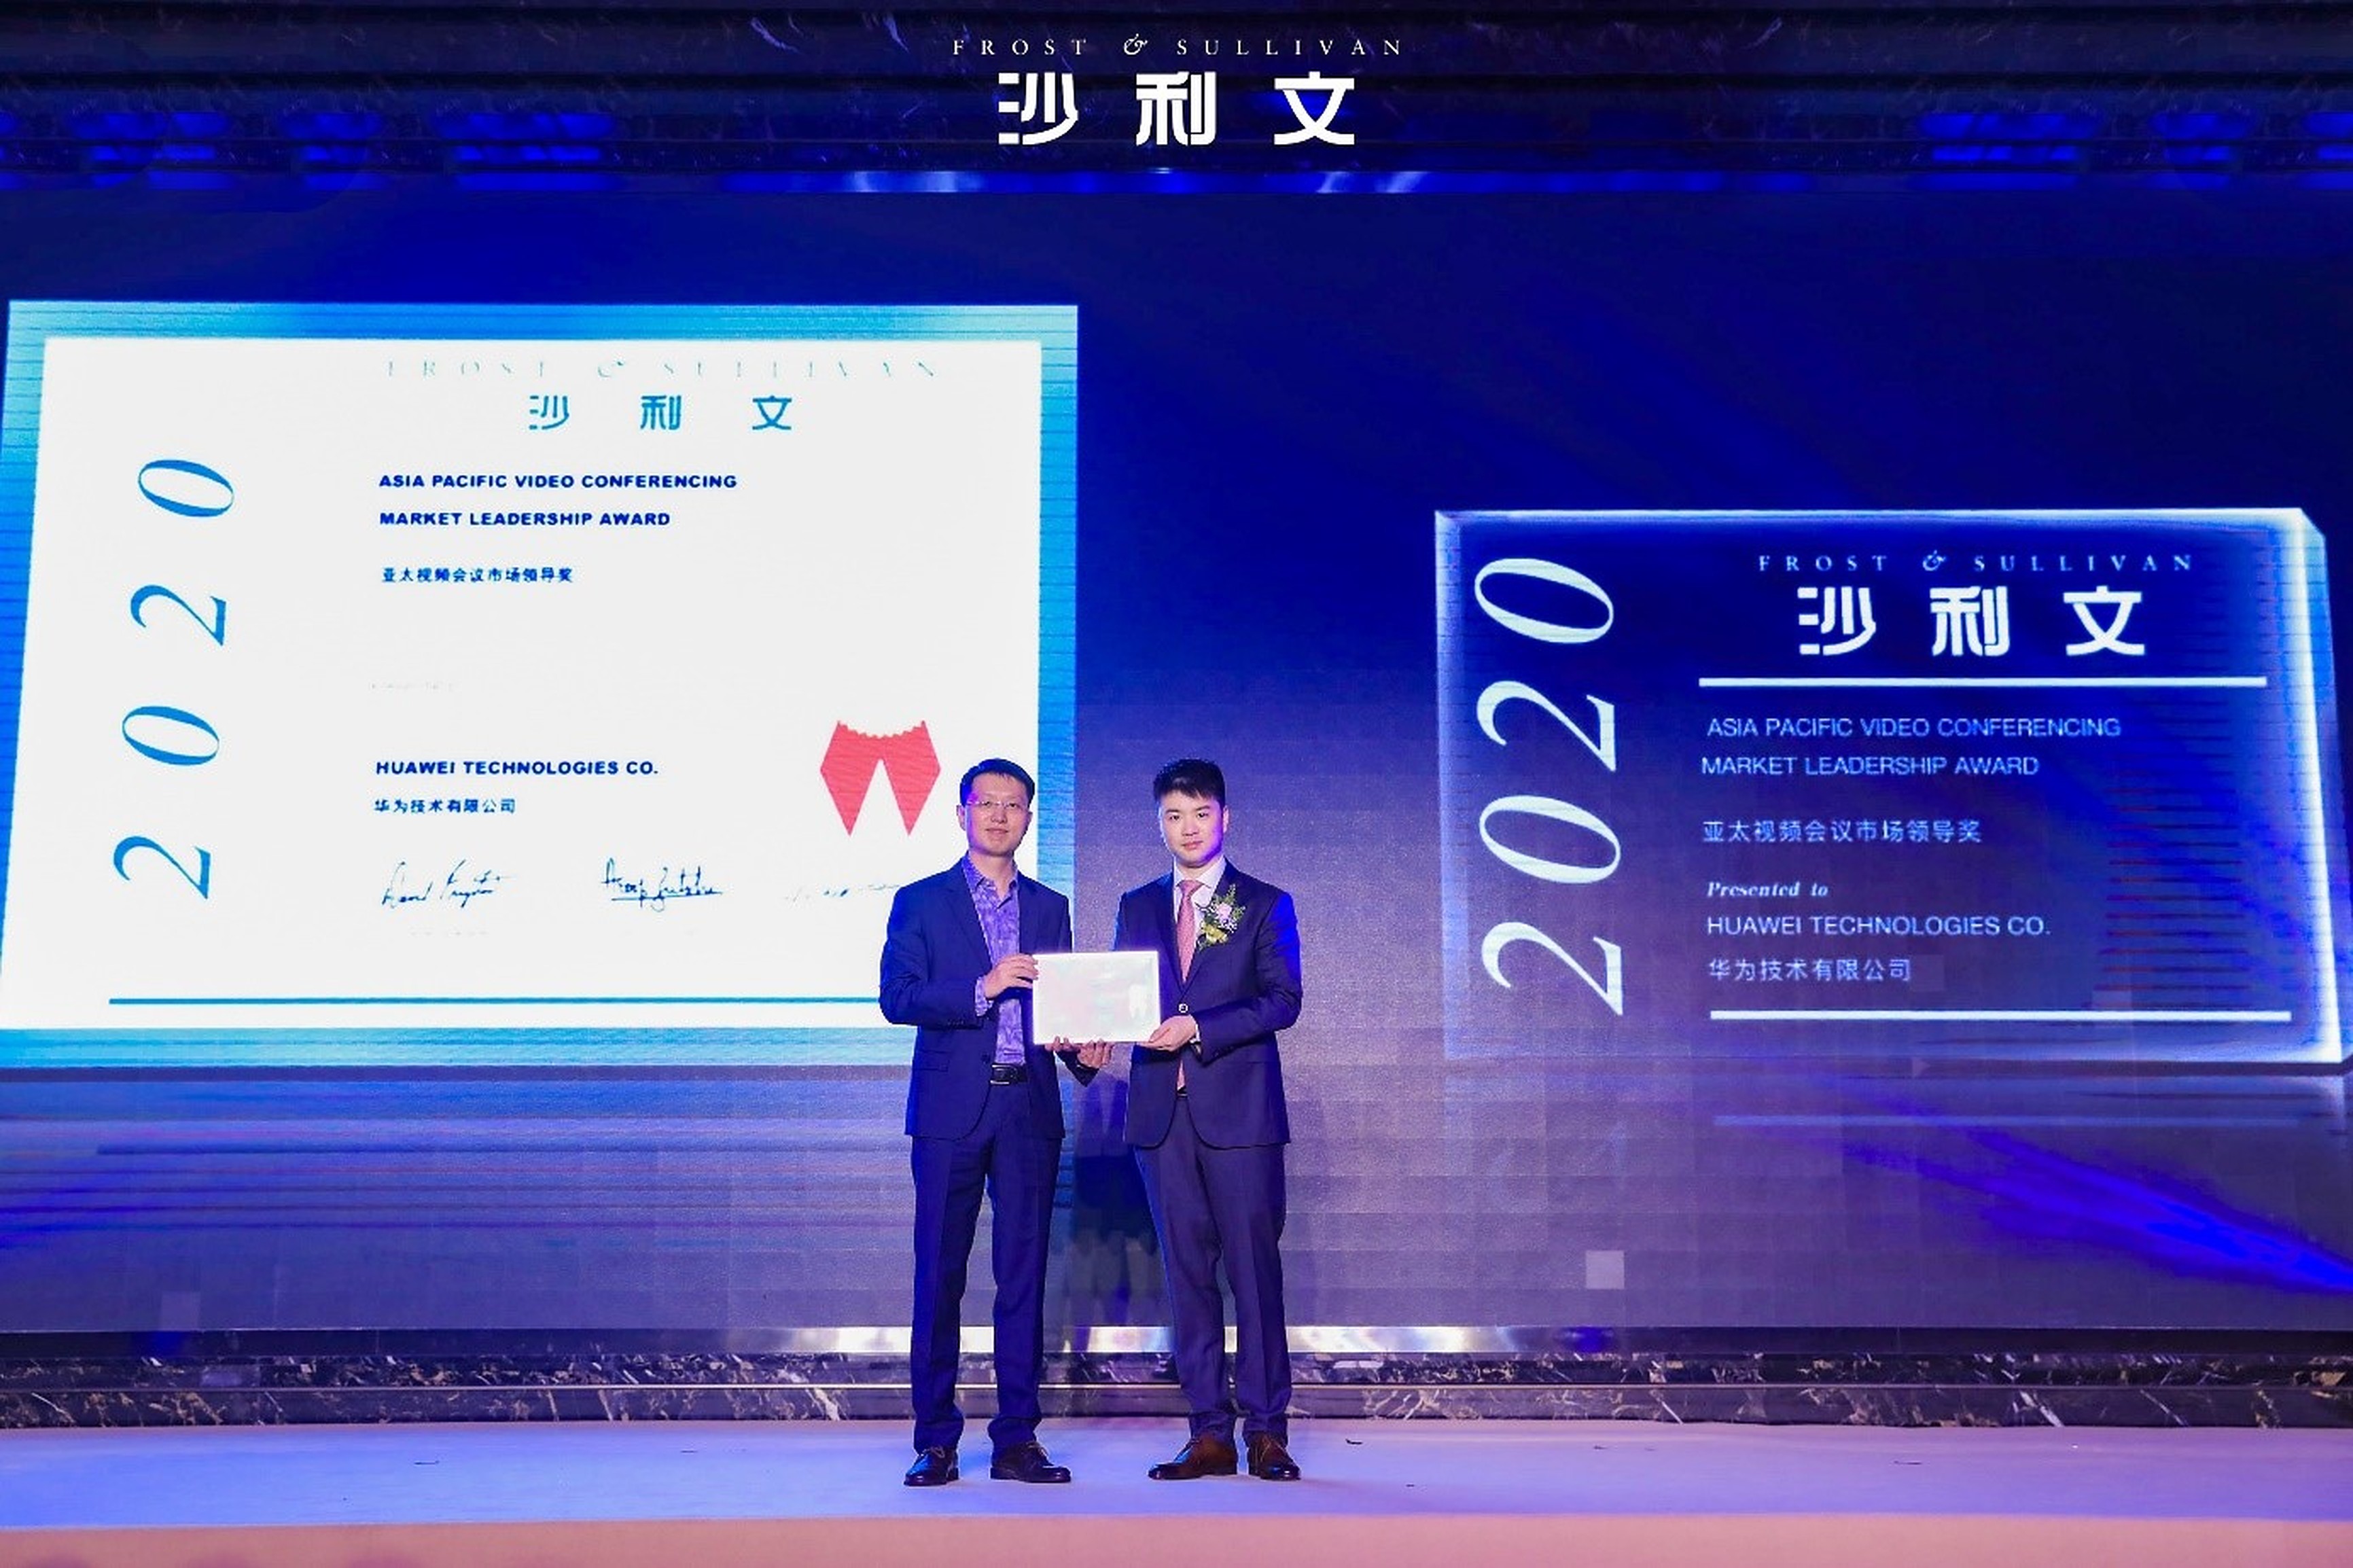 Huawei Triumphs at the Frost Sullivan Awards with Continuous Leadership in Intelligent Collaboration